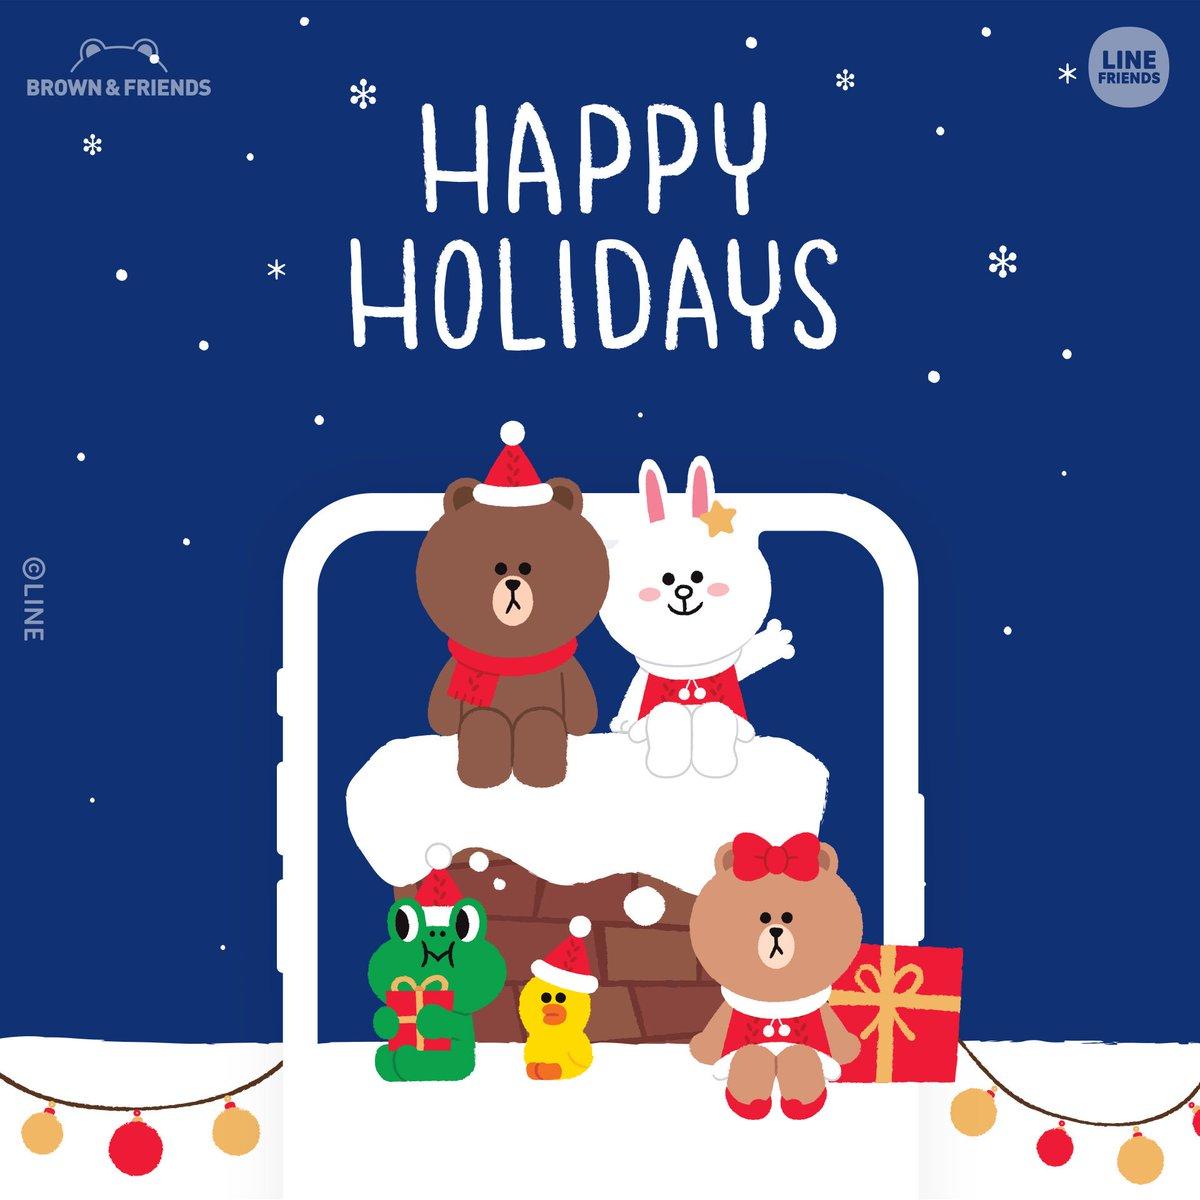 LINE FRIENDS in the Holiday mood with a